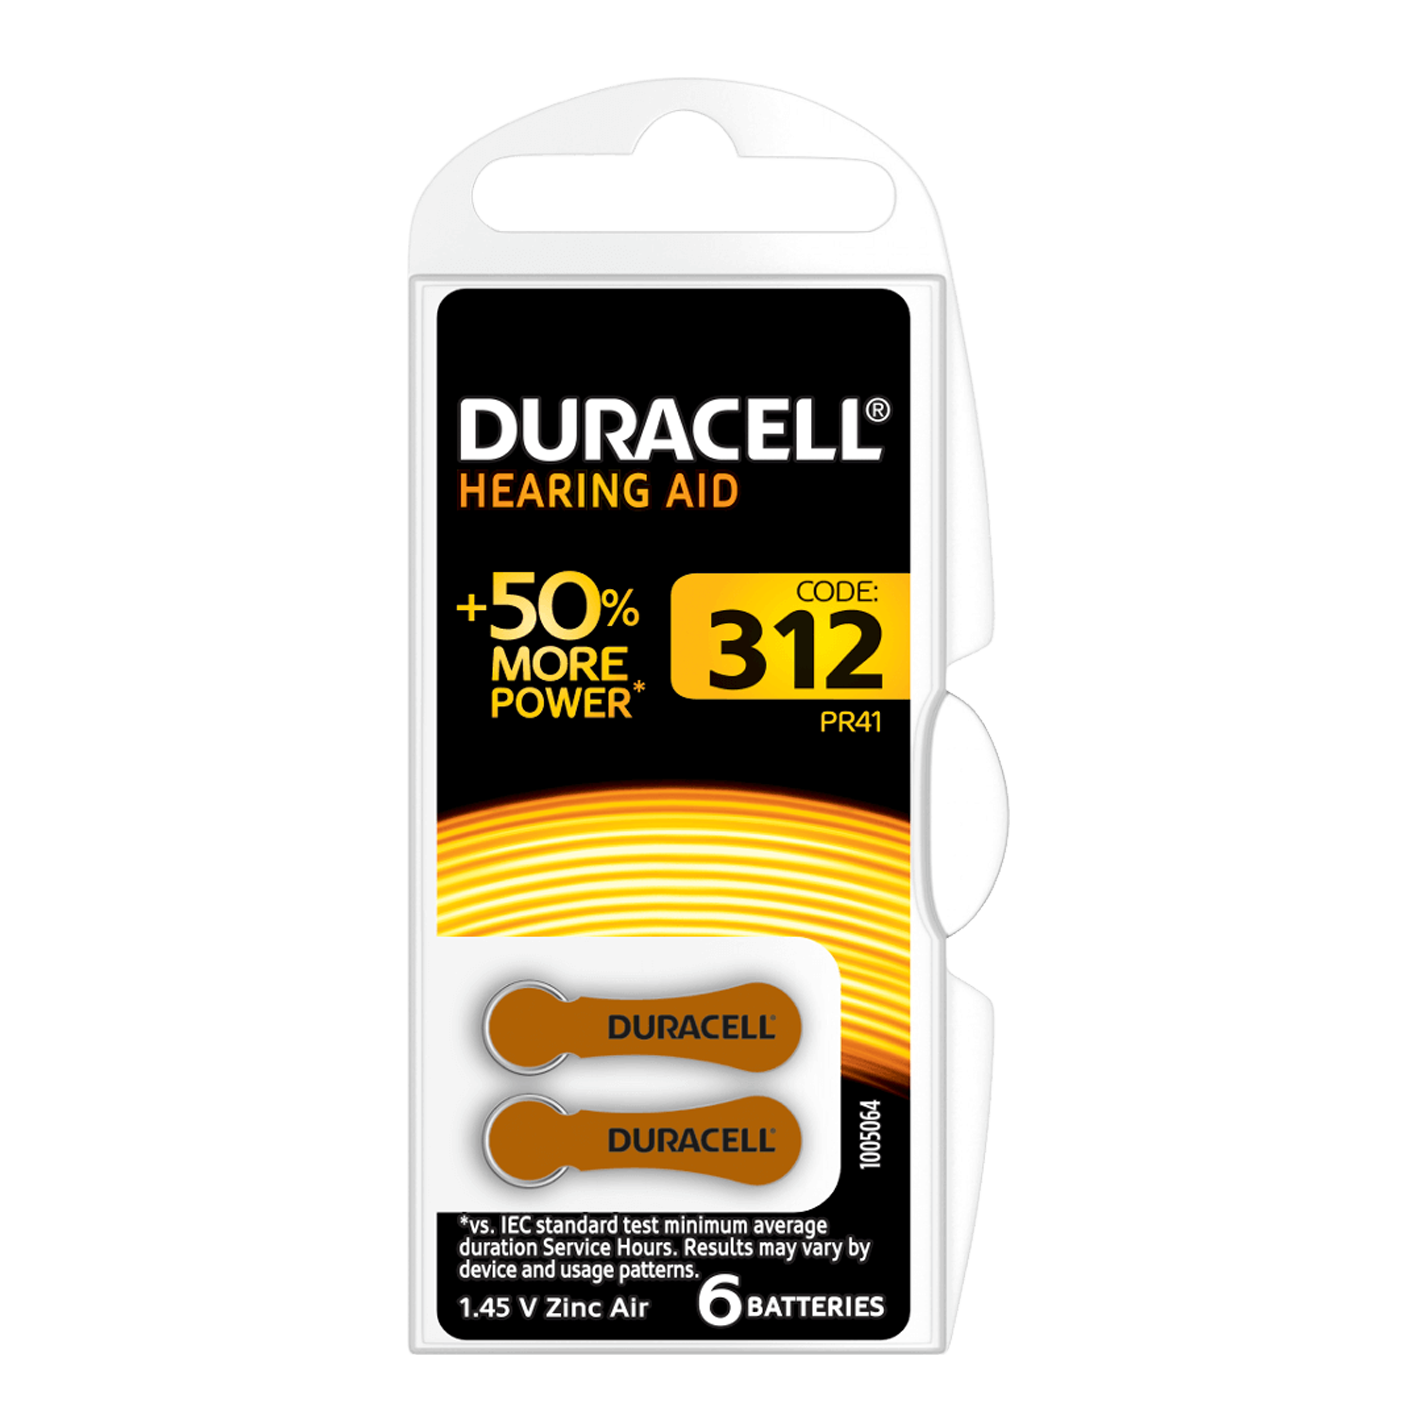 Duracell 312 Hearing Aid Batteries, Pack of 6